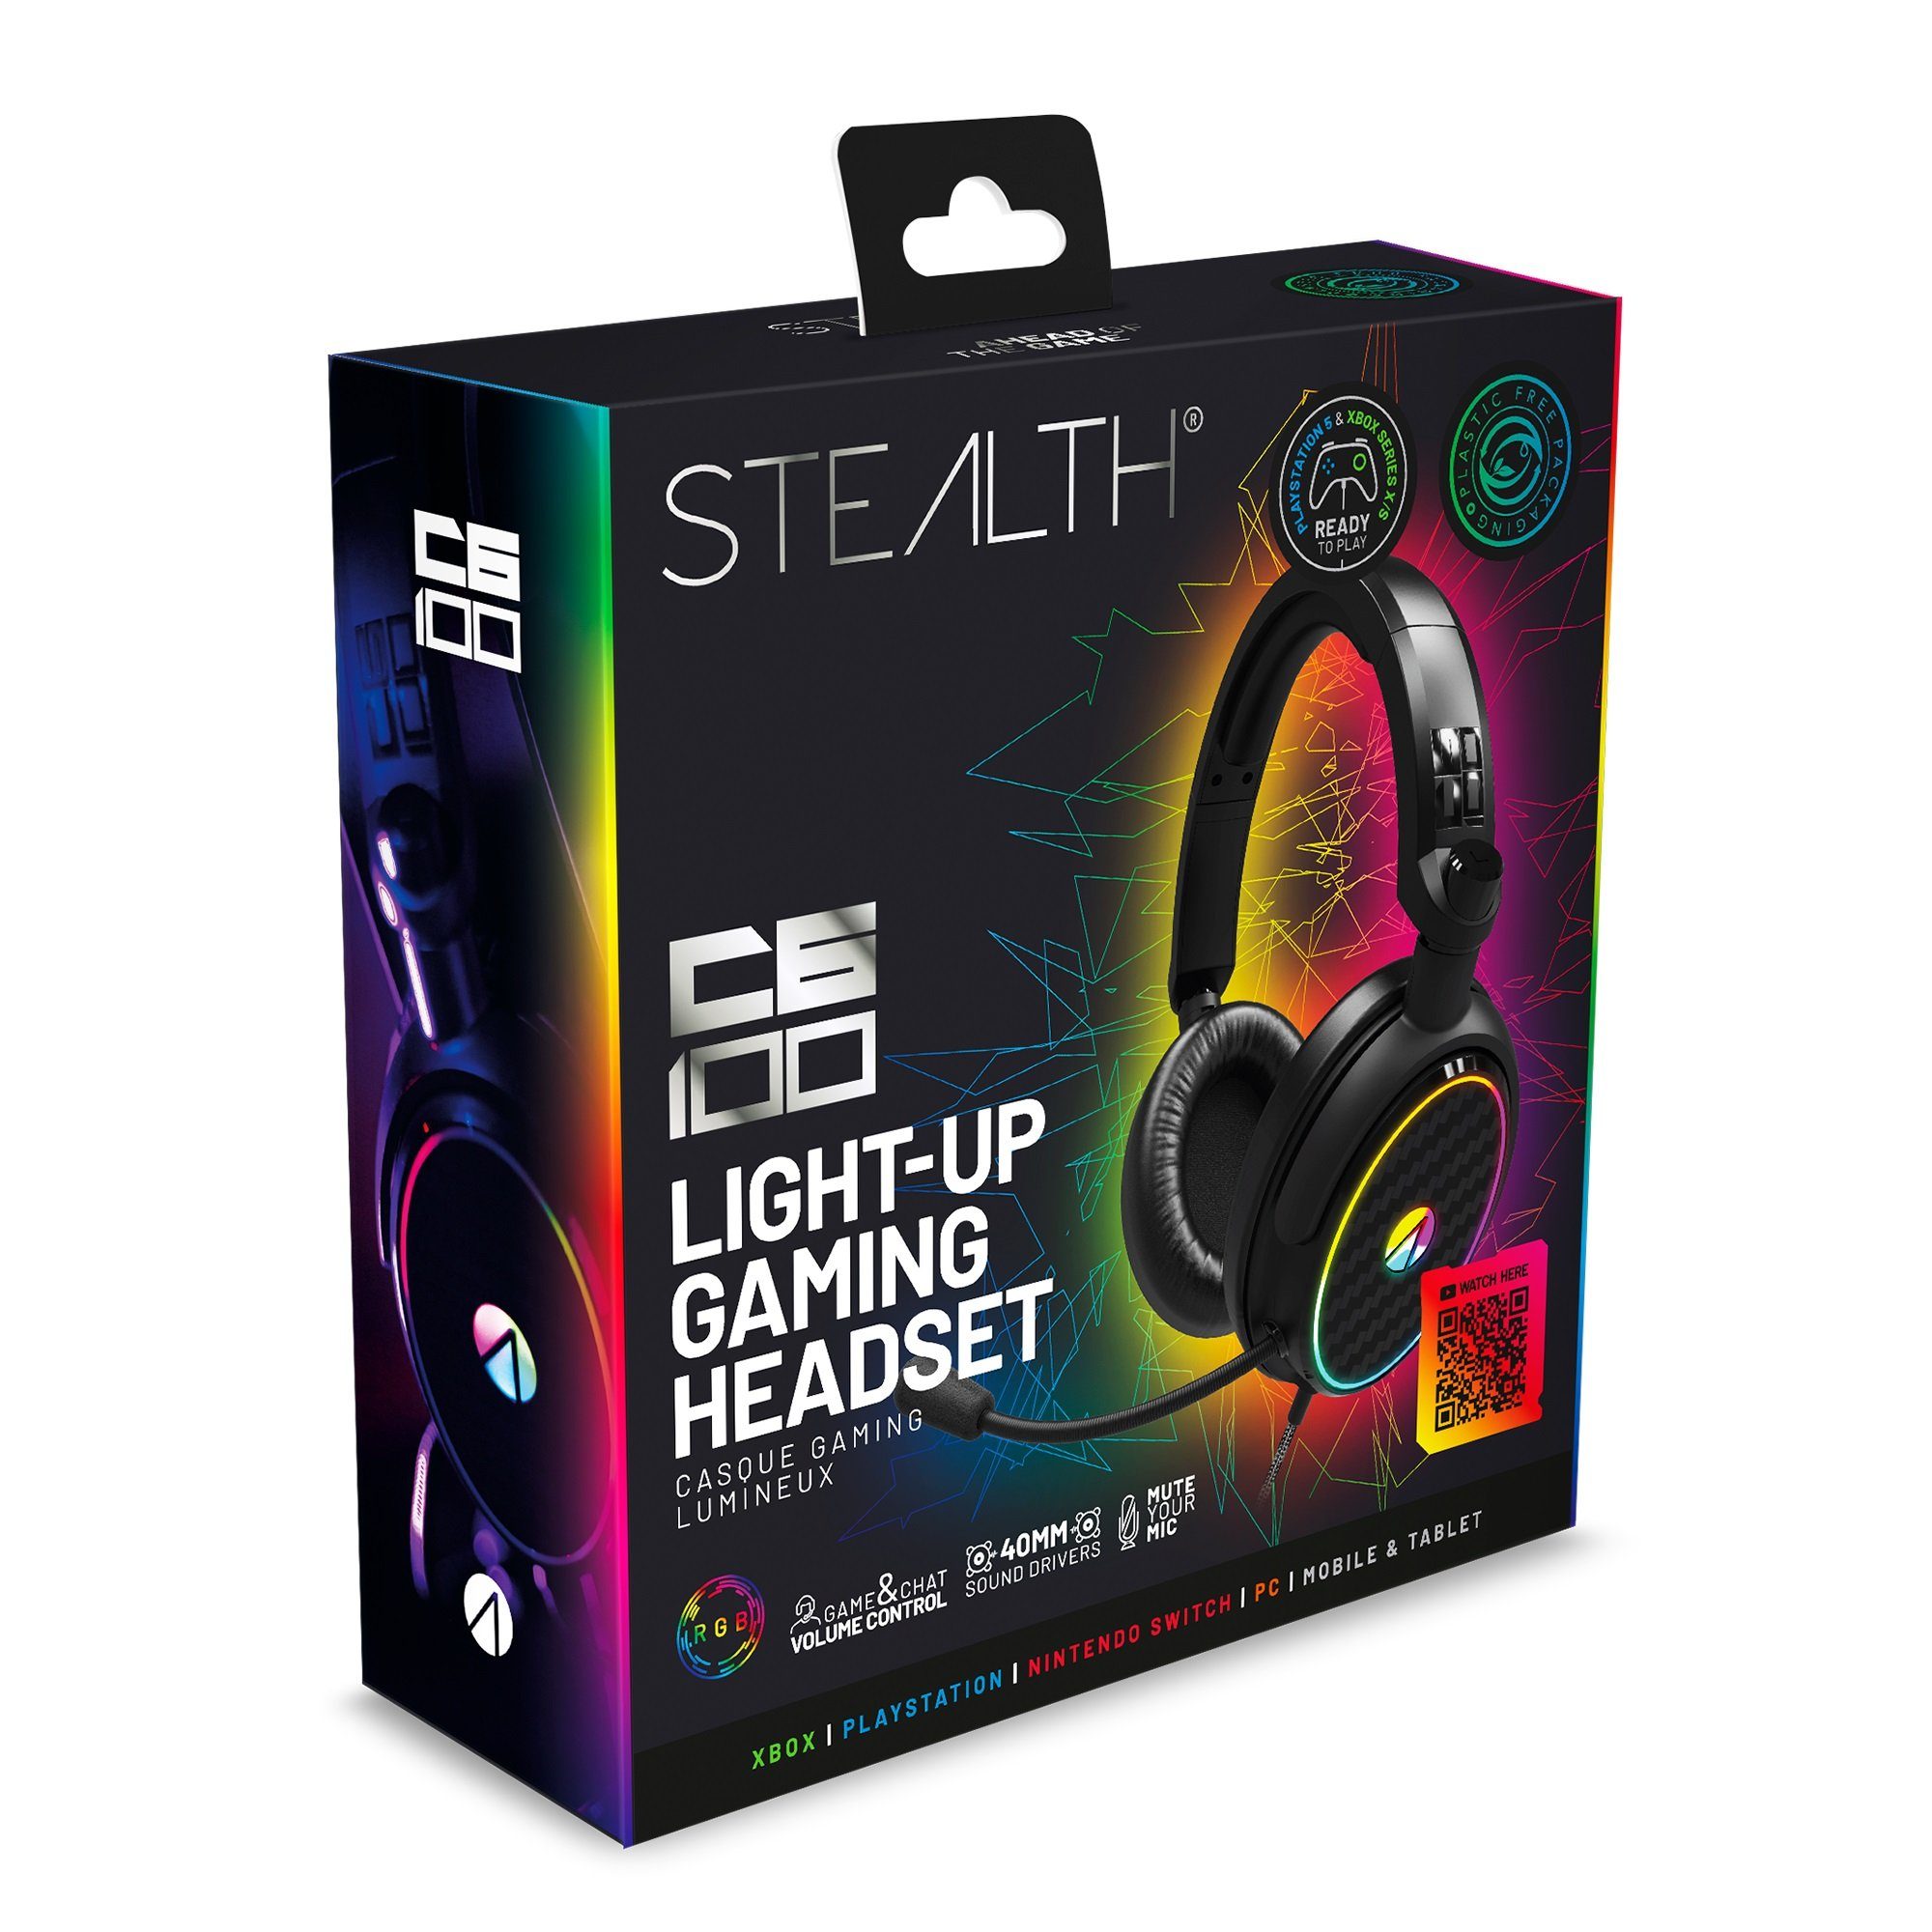 LED Headset Gaming (Plastikfreie Gaming-Headset Beleuchtung mit Stealth Verpackung) C6-100 Stereo